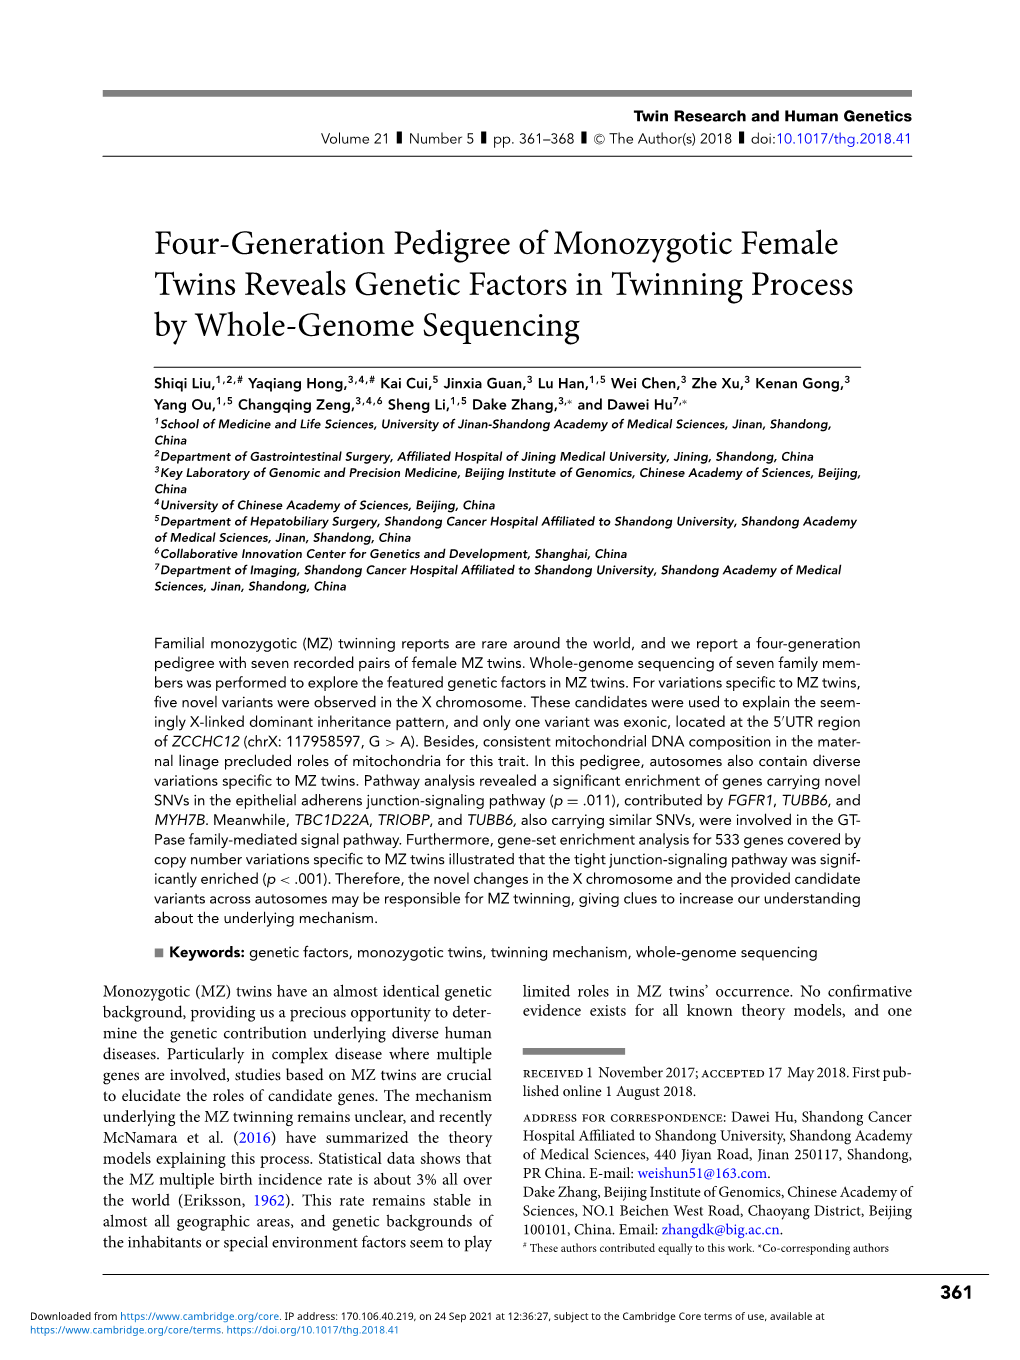 Four-Generation Pedigree of Monozygotic Female Twins Reveals Genetic Factors in Twinning Process by Whole-Genome Sequencing